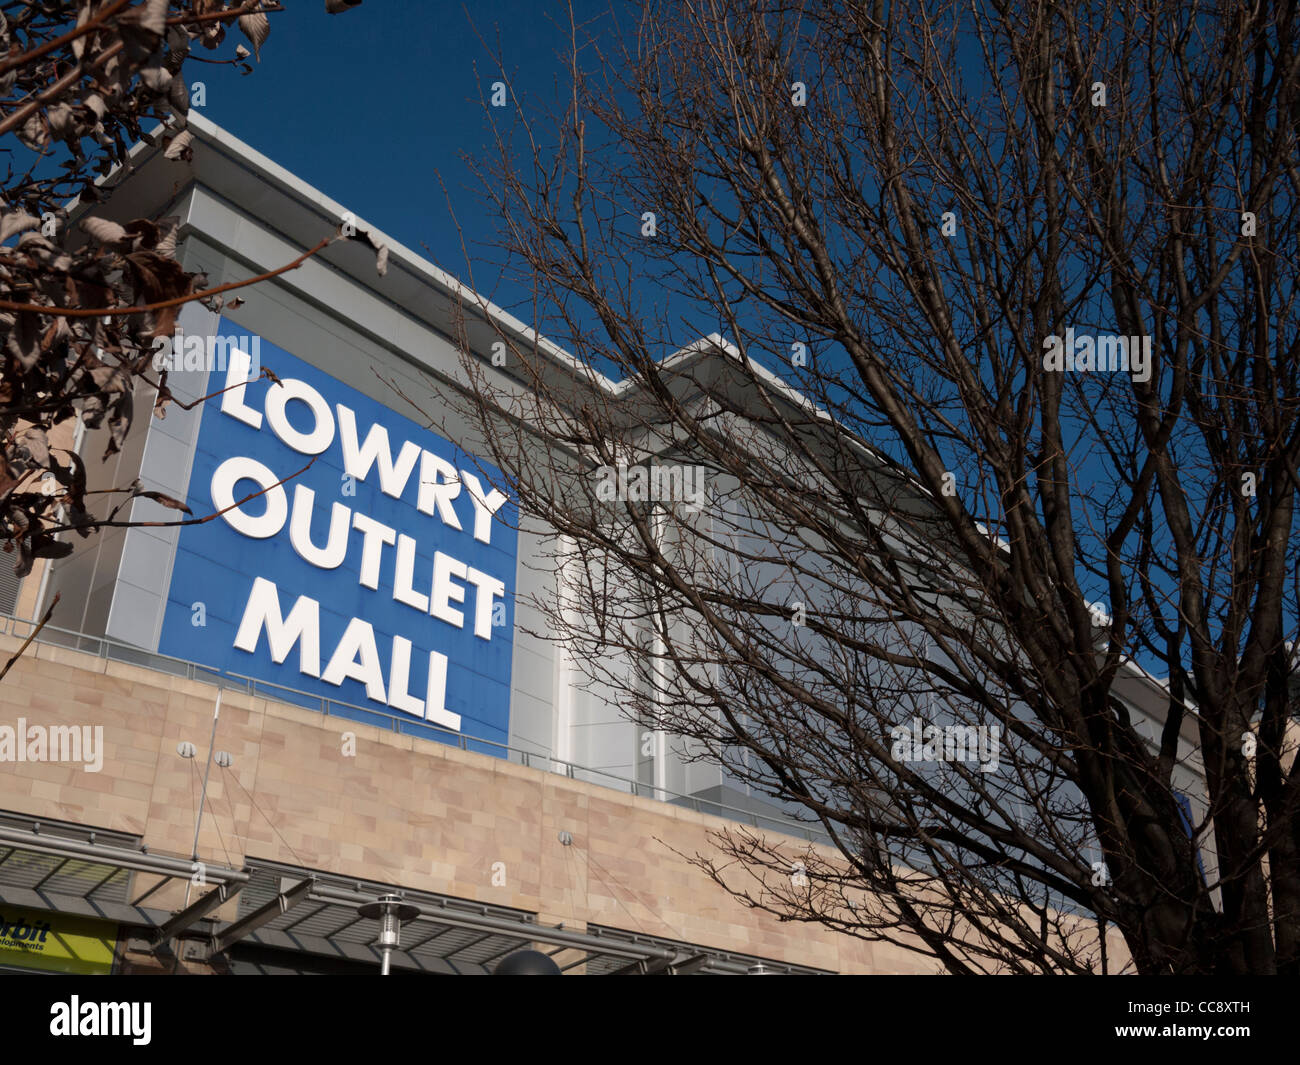 The Lowry Outlet Mall at Salford Quays Manchester Stock Photo